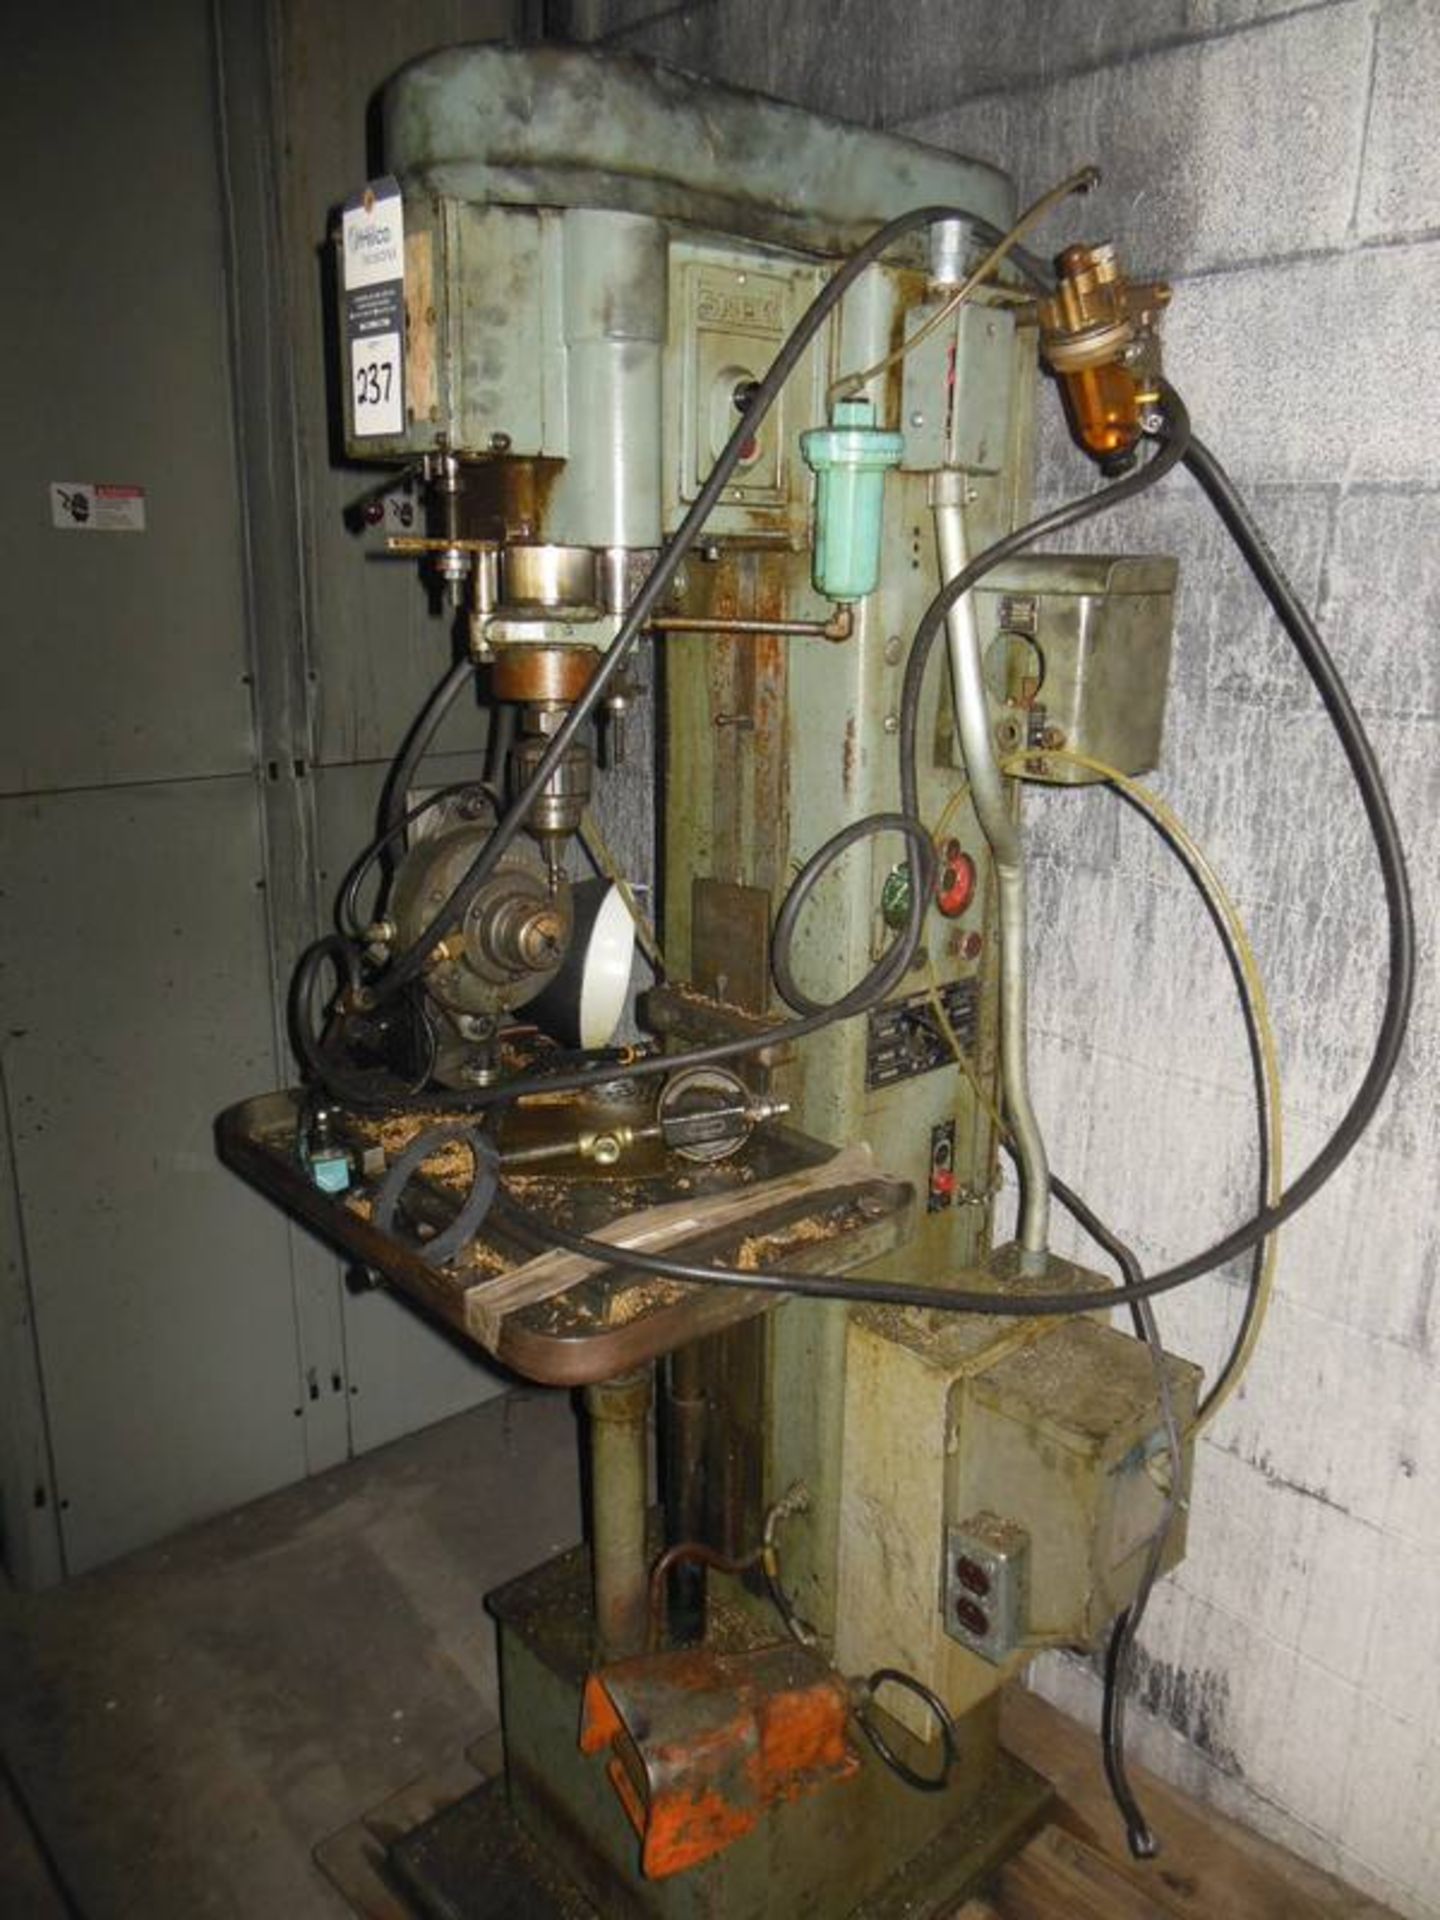 Snow Model DR-2 1-Spindle Drilling & Tapping Machine; Serial Number: 38577-2-269; with 1/2 hp,